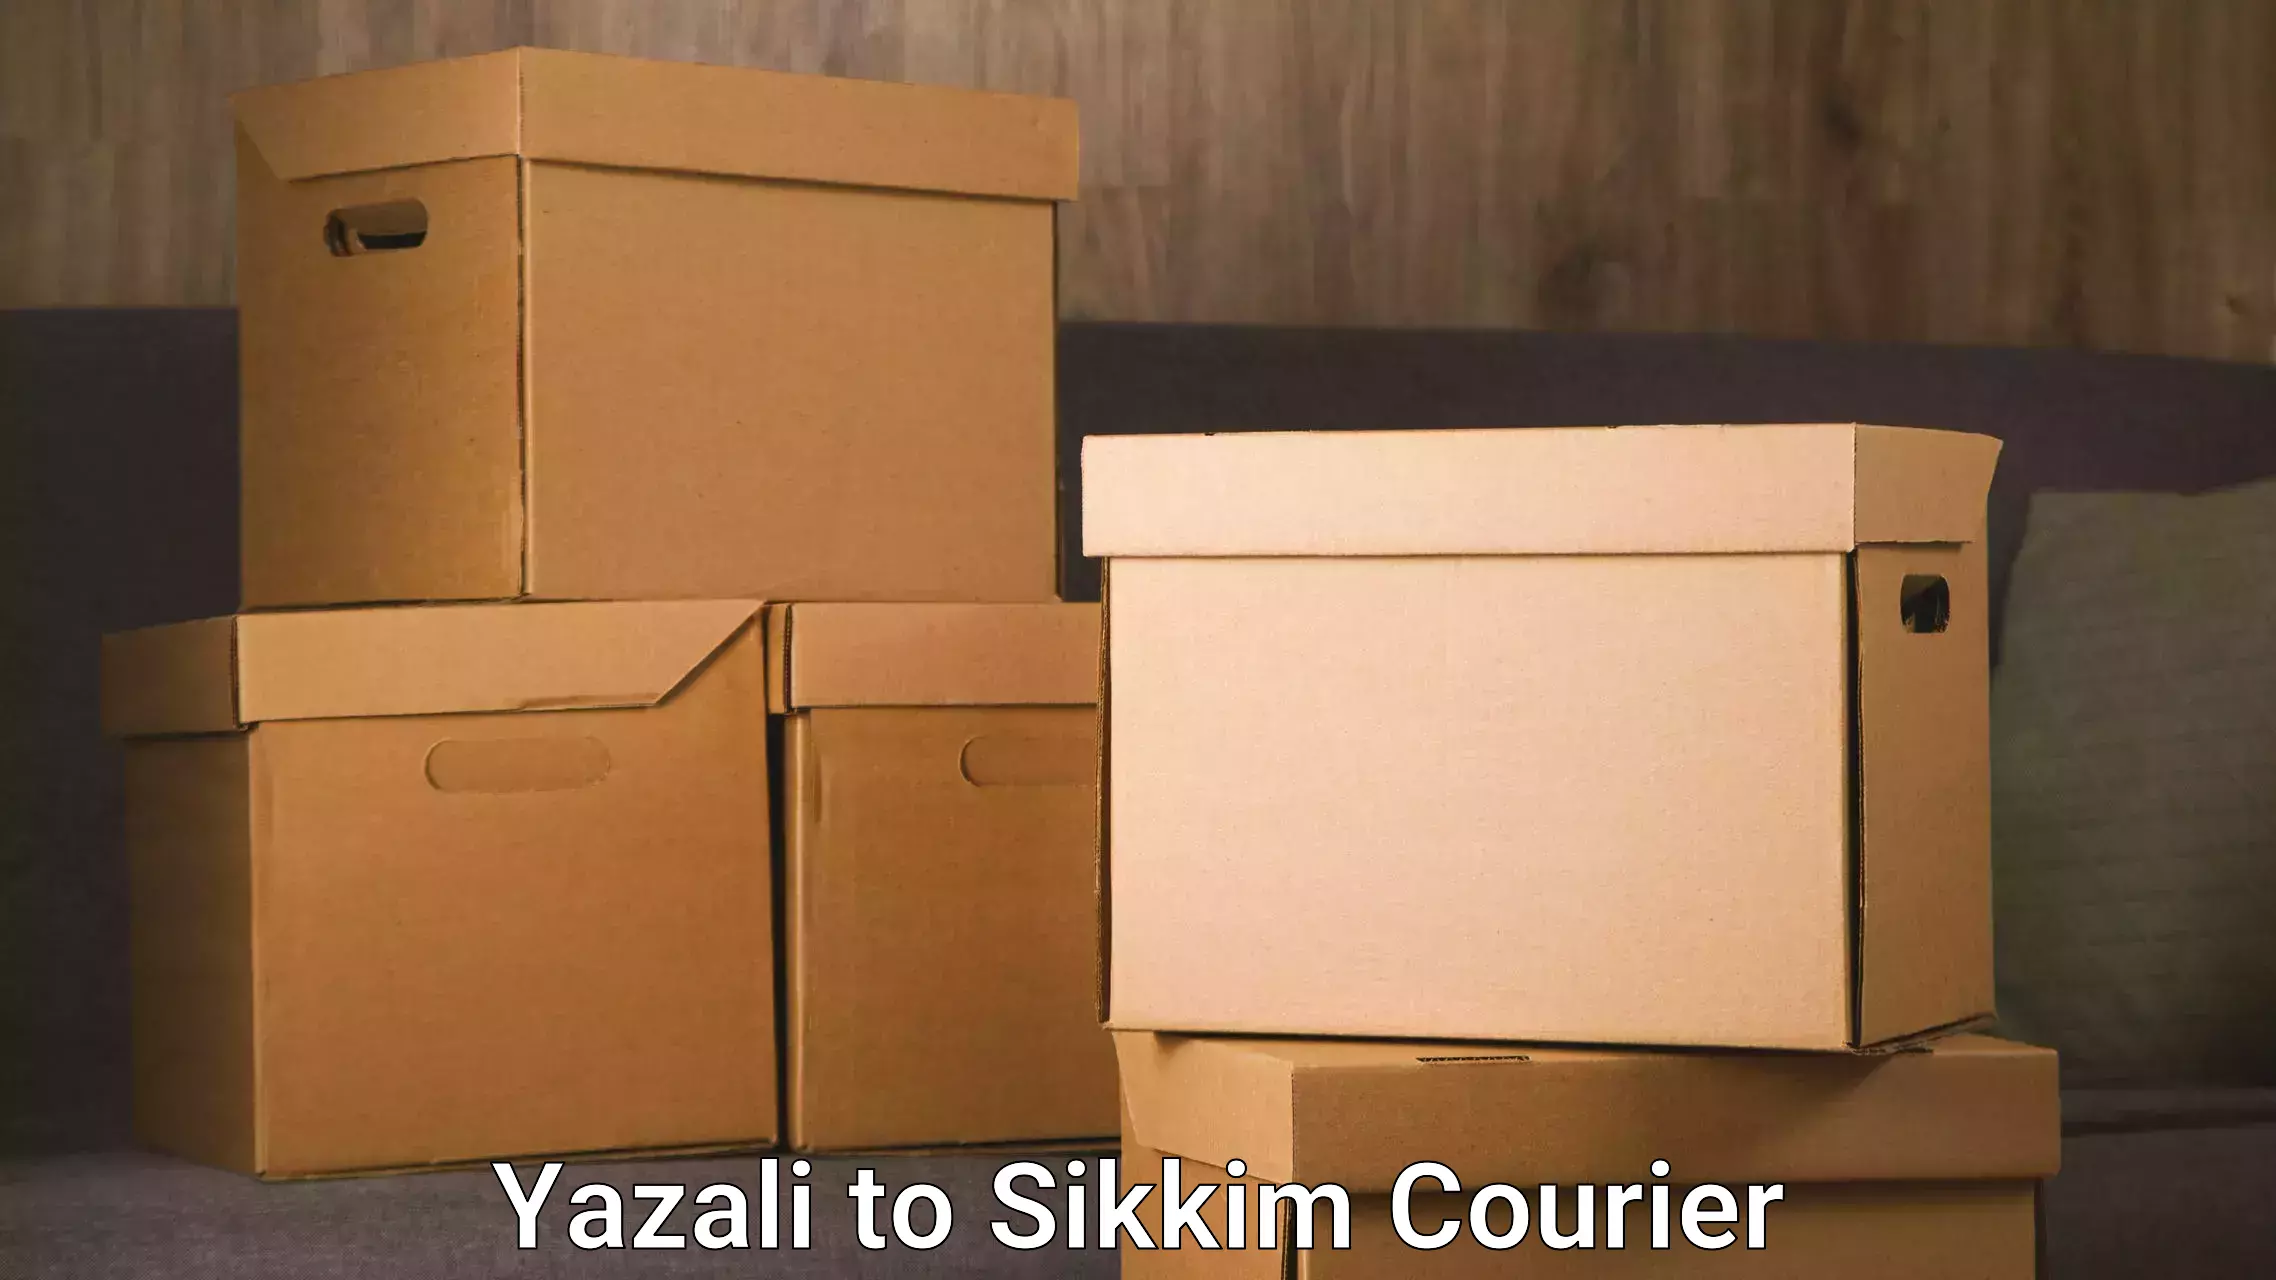 End-to-end delivery Yazali to Sikkim